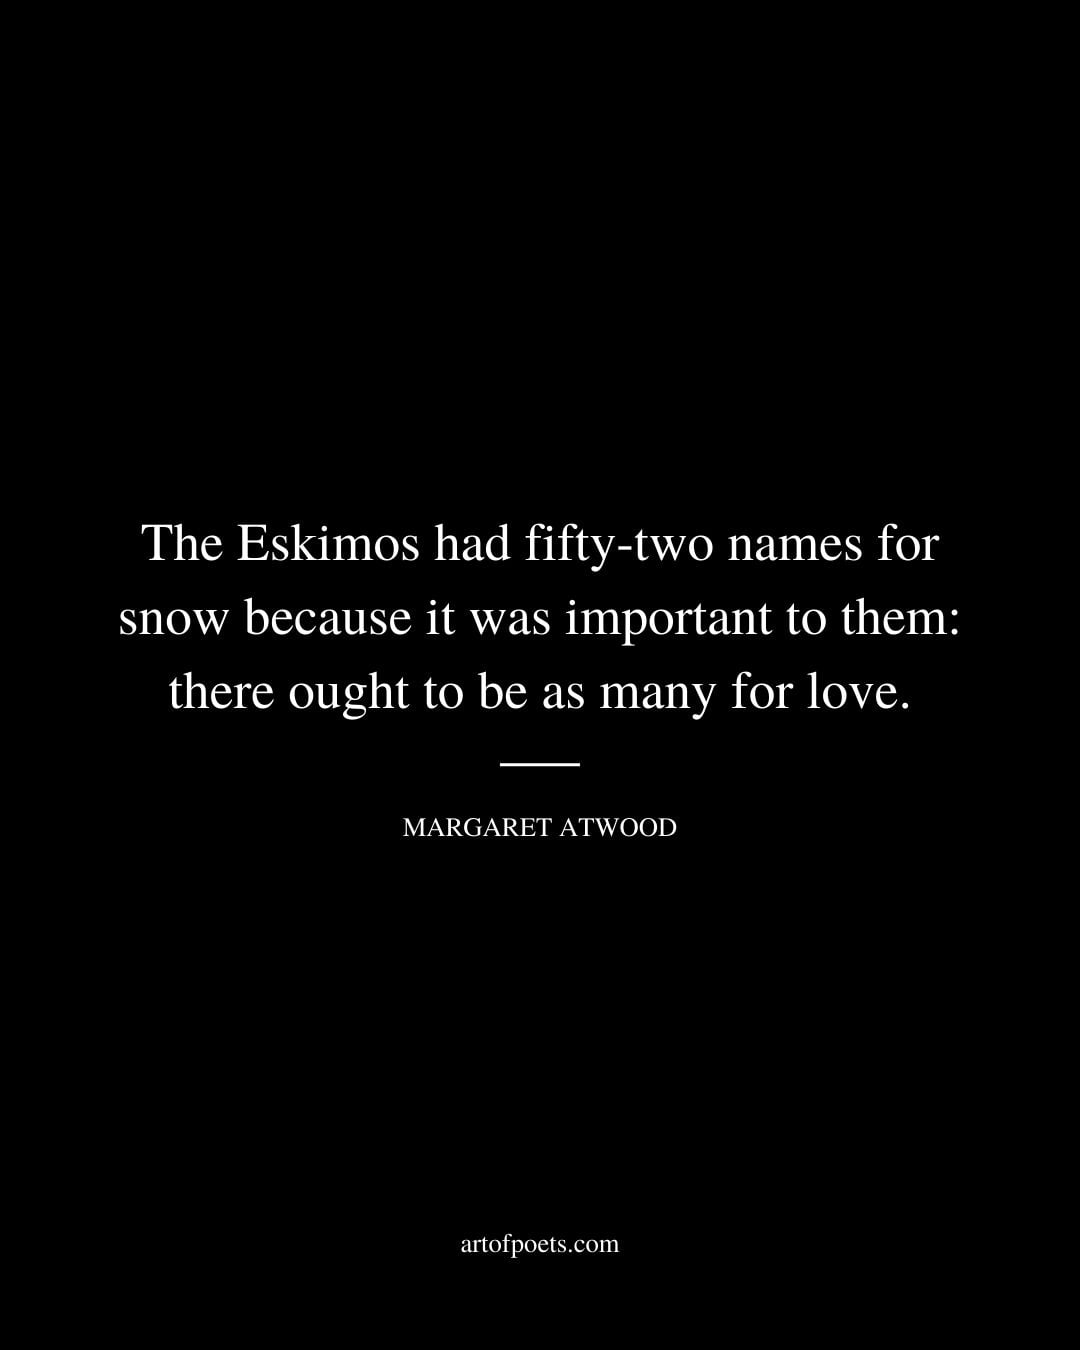 The Eskimos had fifty two names for snow because it was important to them there ought to be as many for love